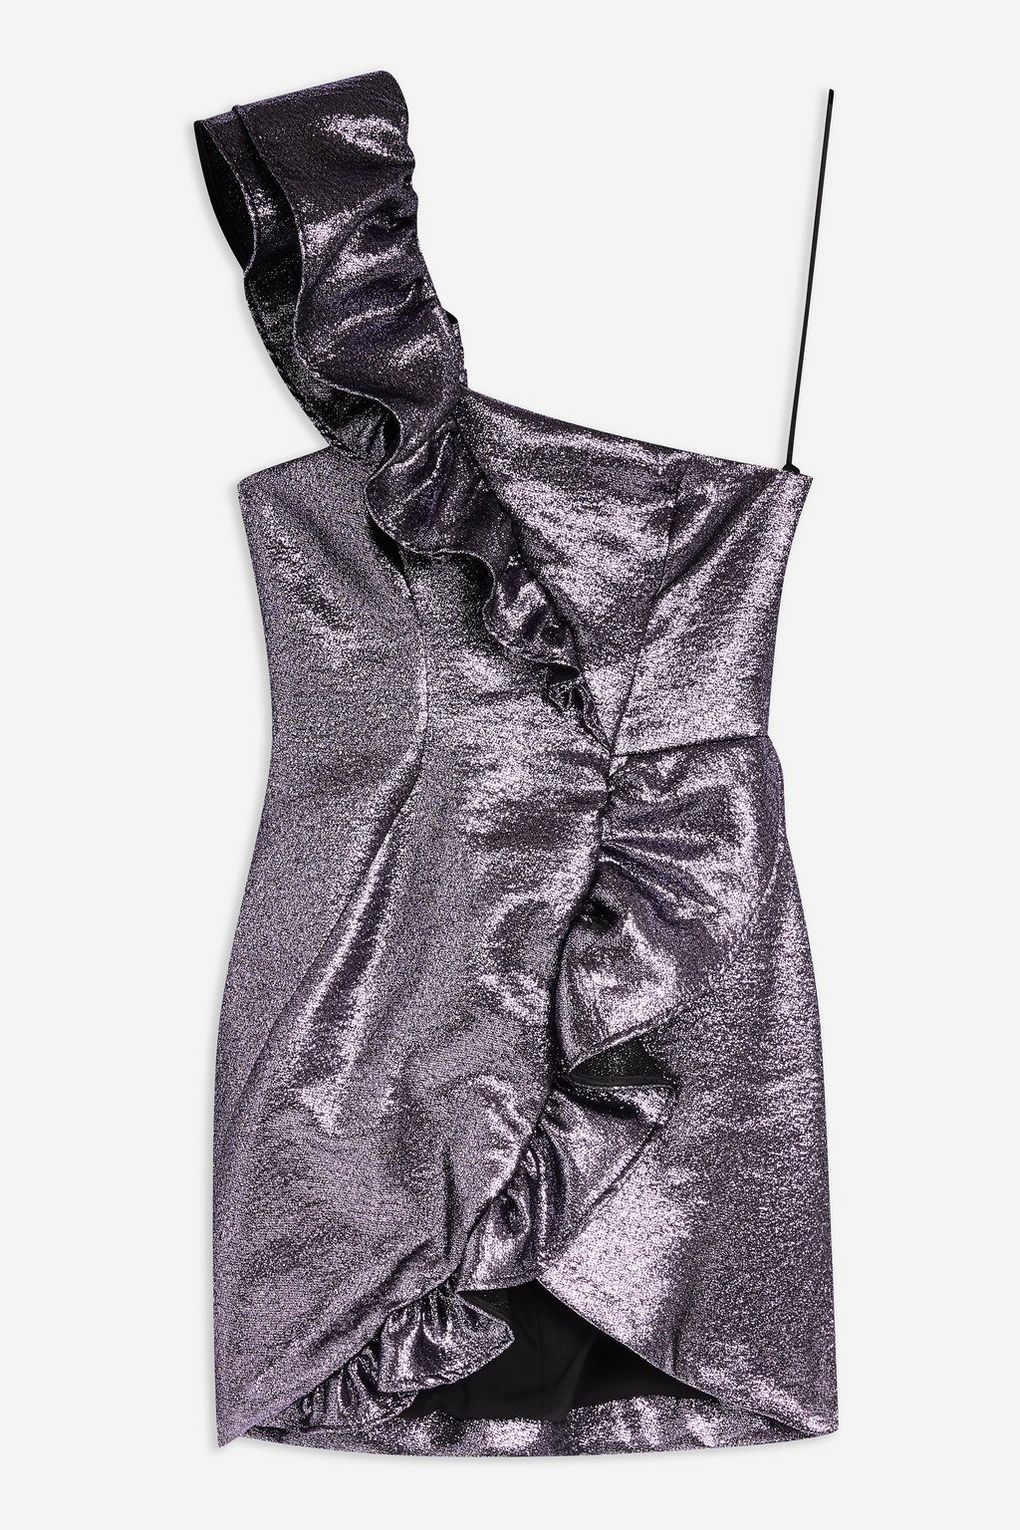 It’s Party Time, Sis! Grab-And-Go With These Last-Minute NYE Dresses Under $100